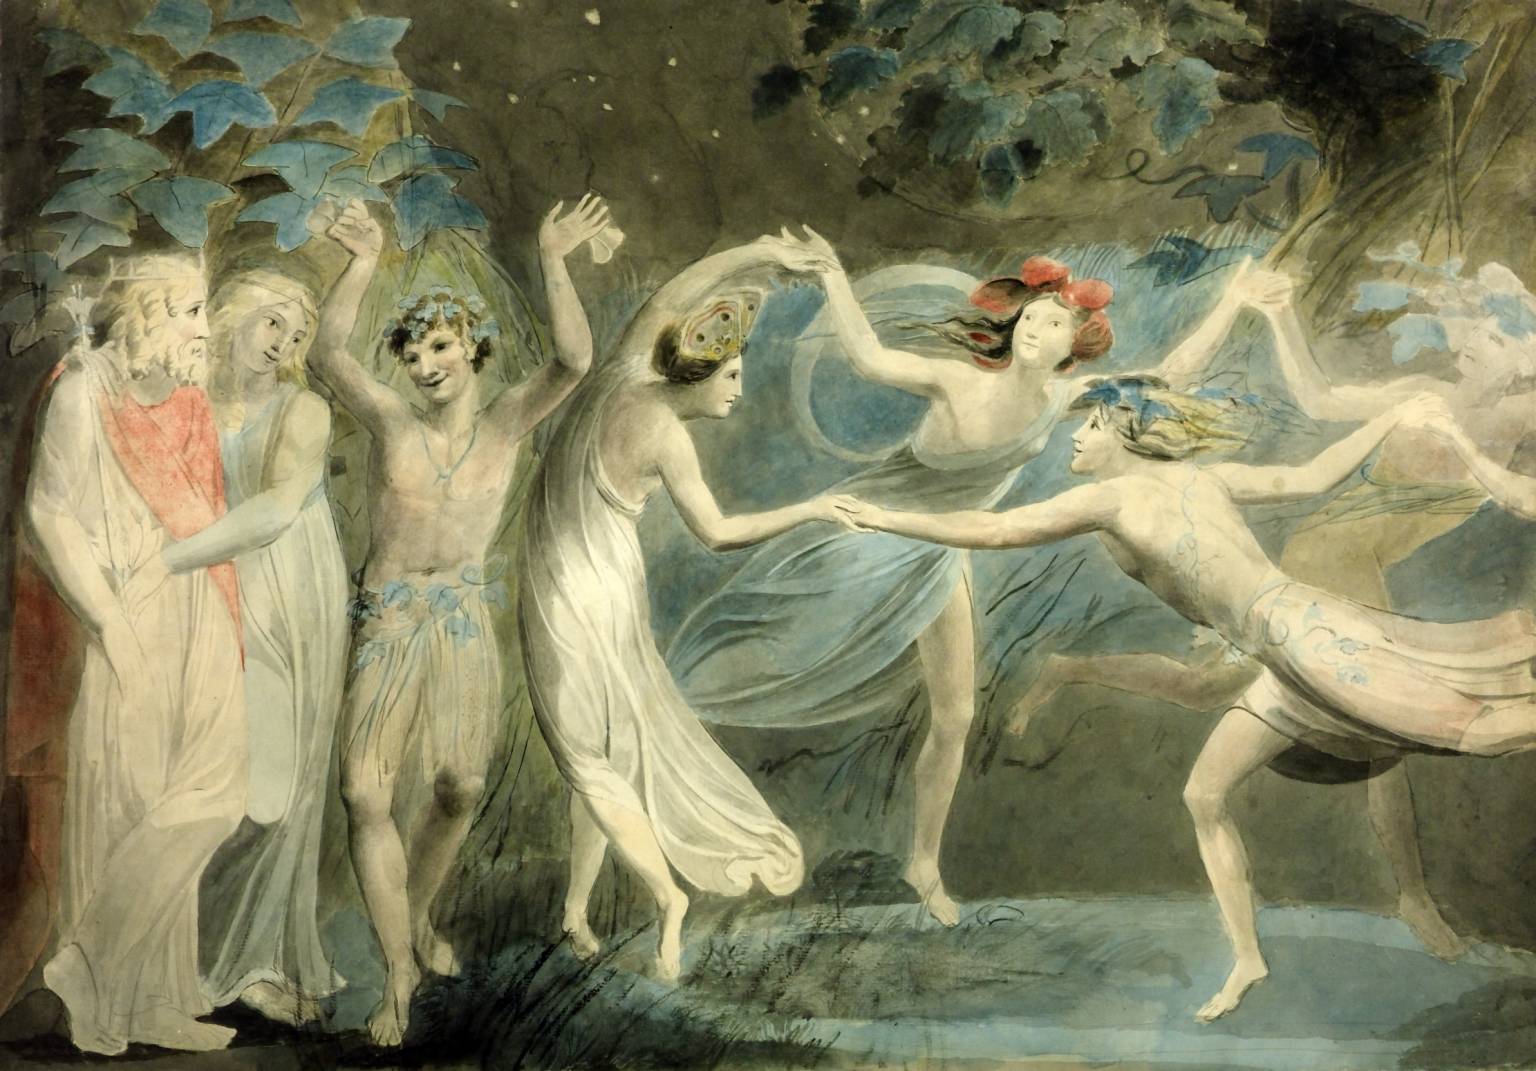 A group of fairies are lit with light as they dance under the moon near a pond.